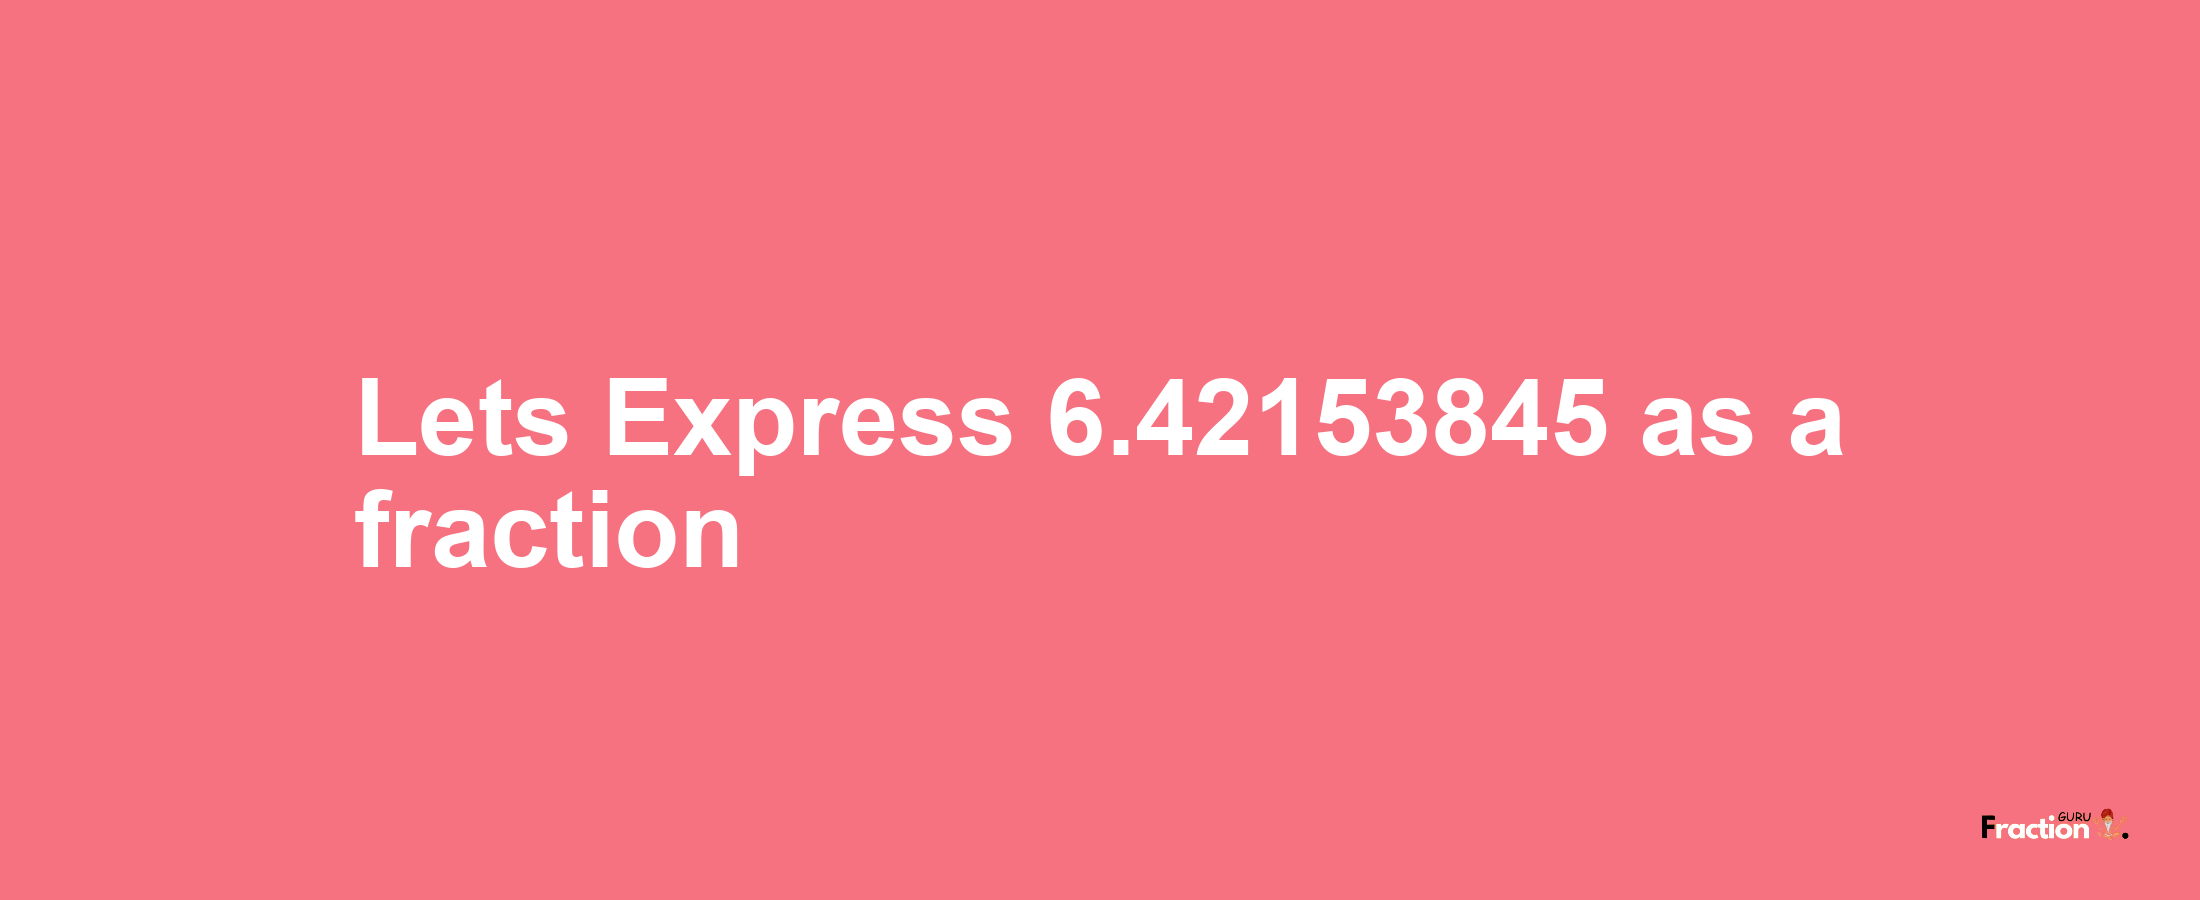 Lets Express 6.42153845 as afraction